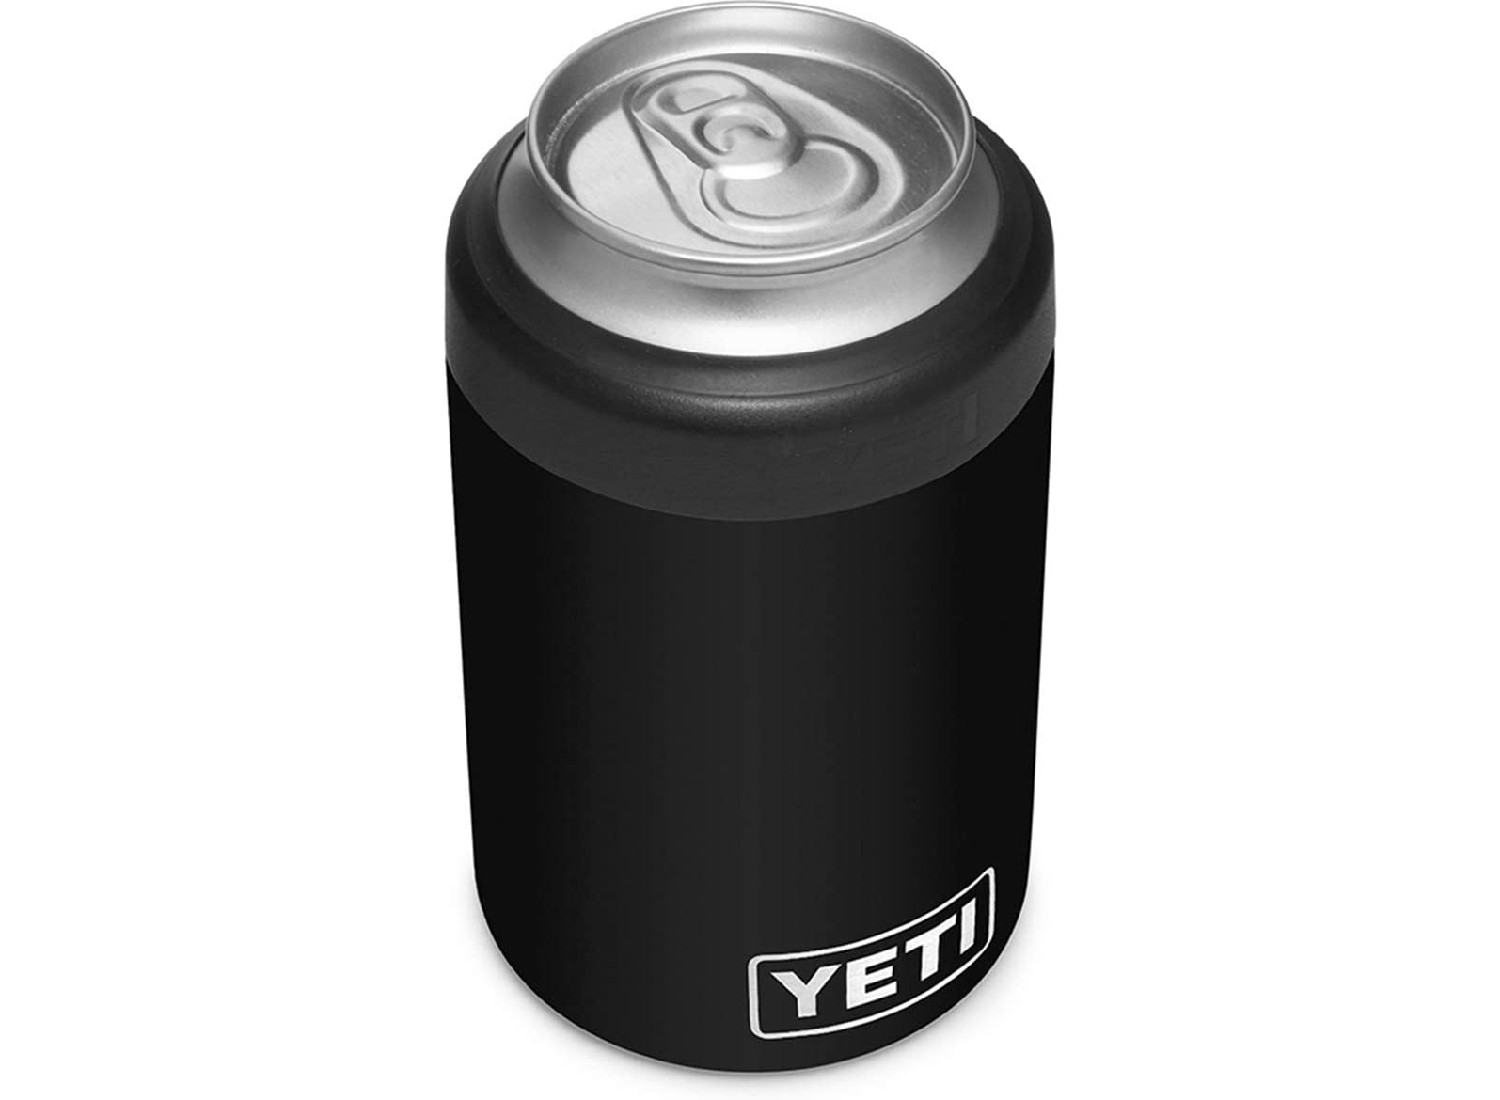 Insulated Can Cooler reviews